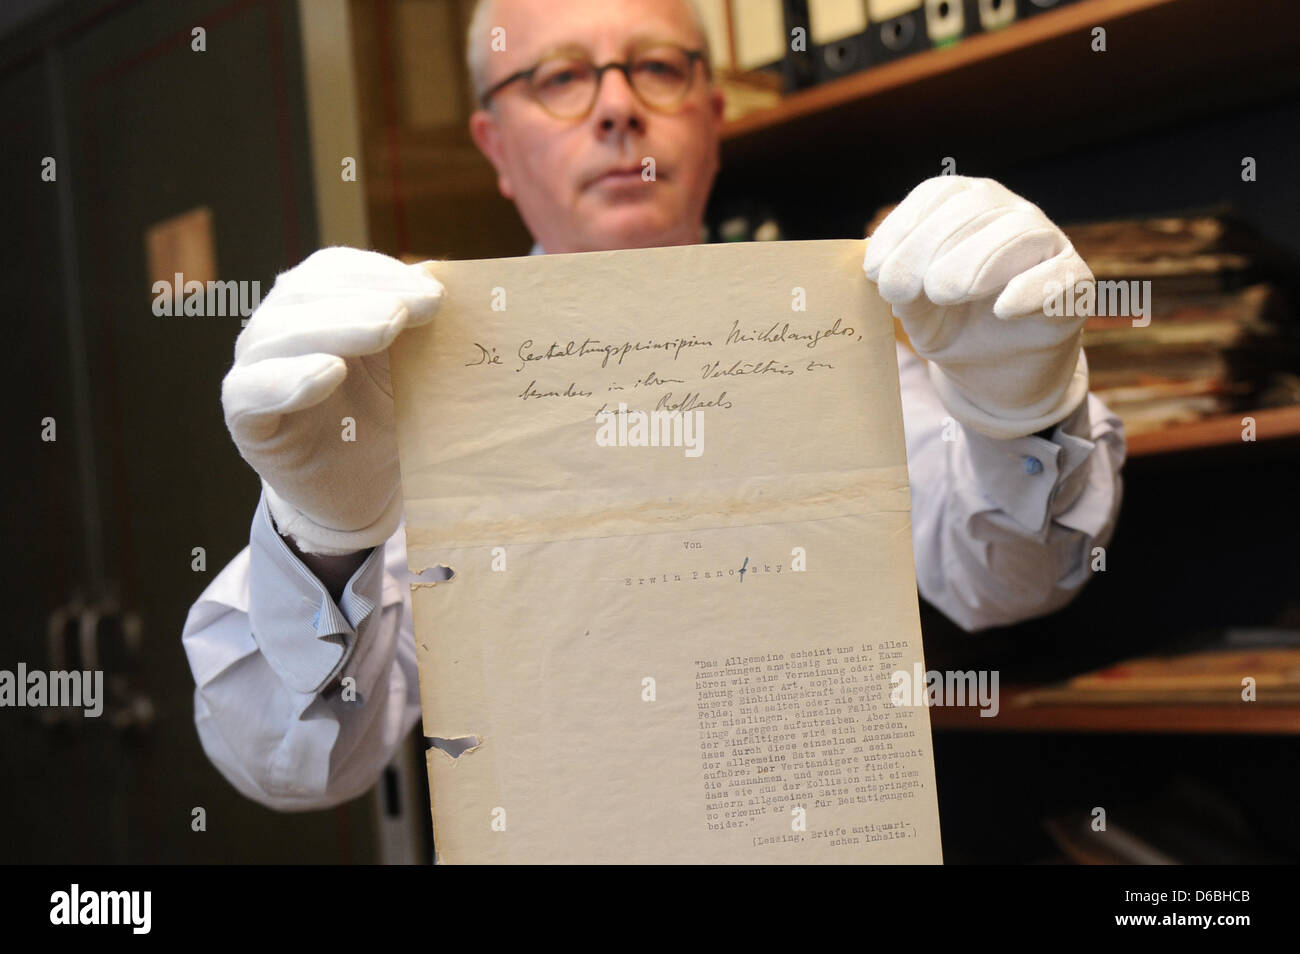 Art historian Stephan Klingen from the Central Institute of Art History holds the missing title page believed to be from the habilitation work on artist Michelangelo by famed art historian Erwin Panofsky (1892-1968) in Munich, Germany, 31 August 2012. Klingen found the page in an old NSDAP safe in the basement of the building. The institute is located in a former NSDAP administrati Stock Photo